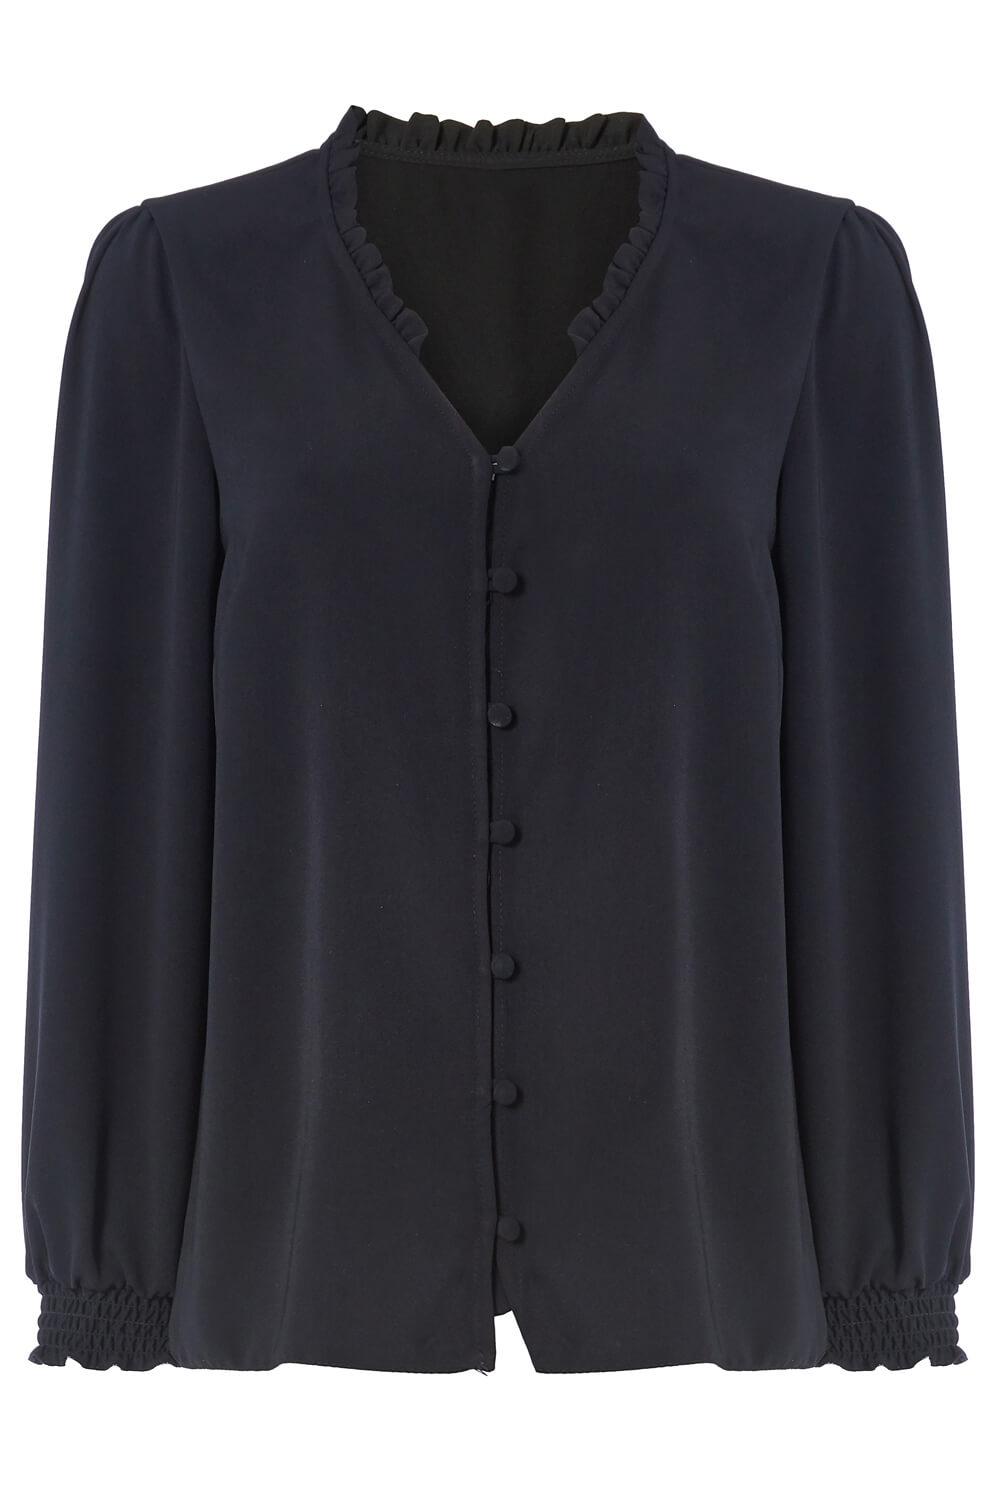 Black Frill Detail Button Through Blouse, Image 5 of 5